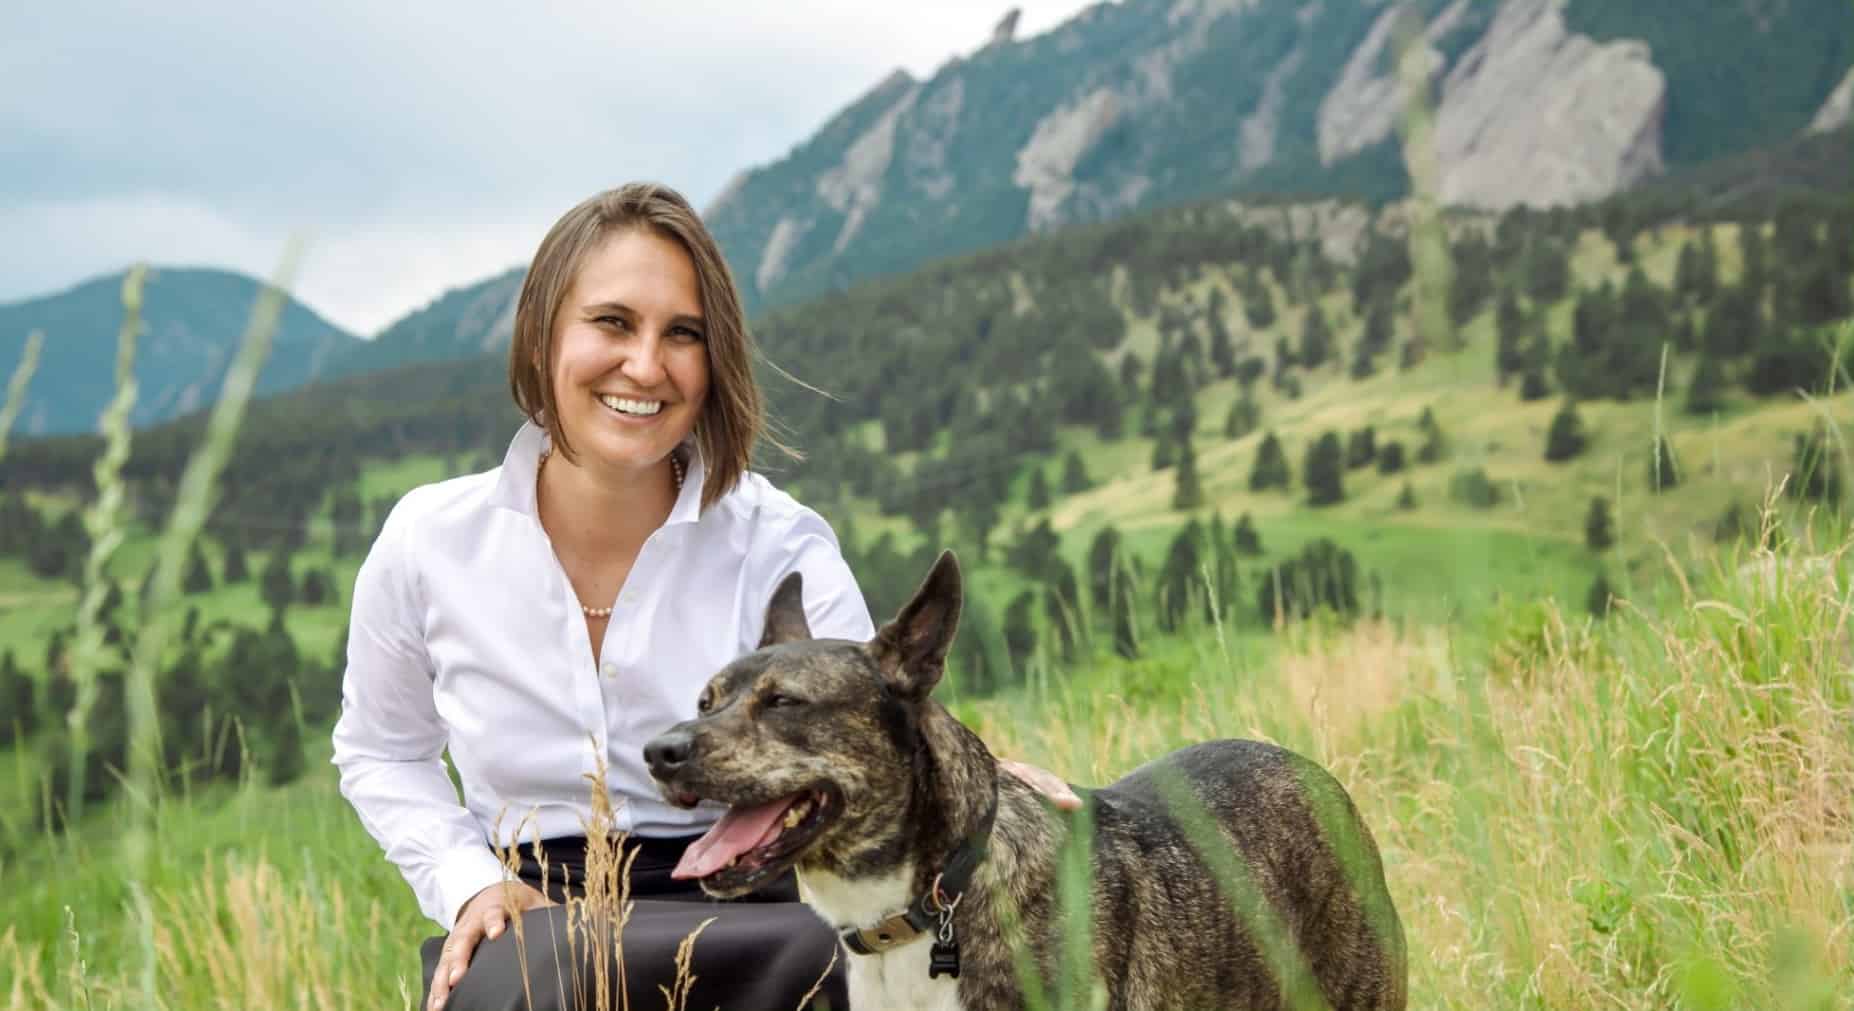 On Air with Laura LeBeau Interviews Kristina Bergsten on Animal Law and the Shooting of Gunner, the dog, Part 1